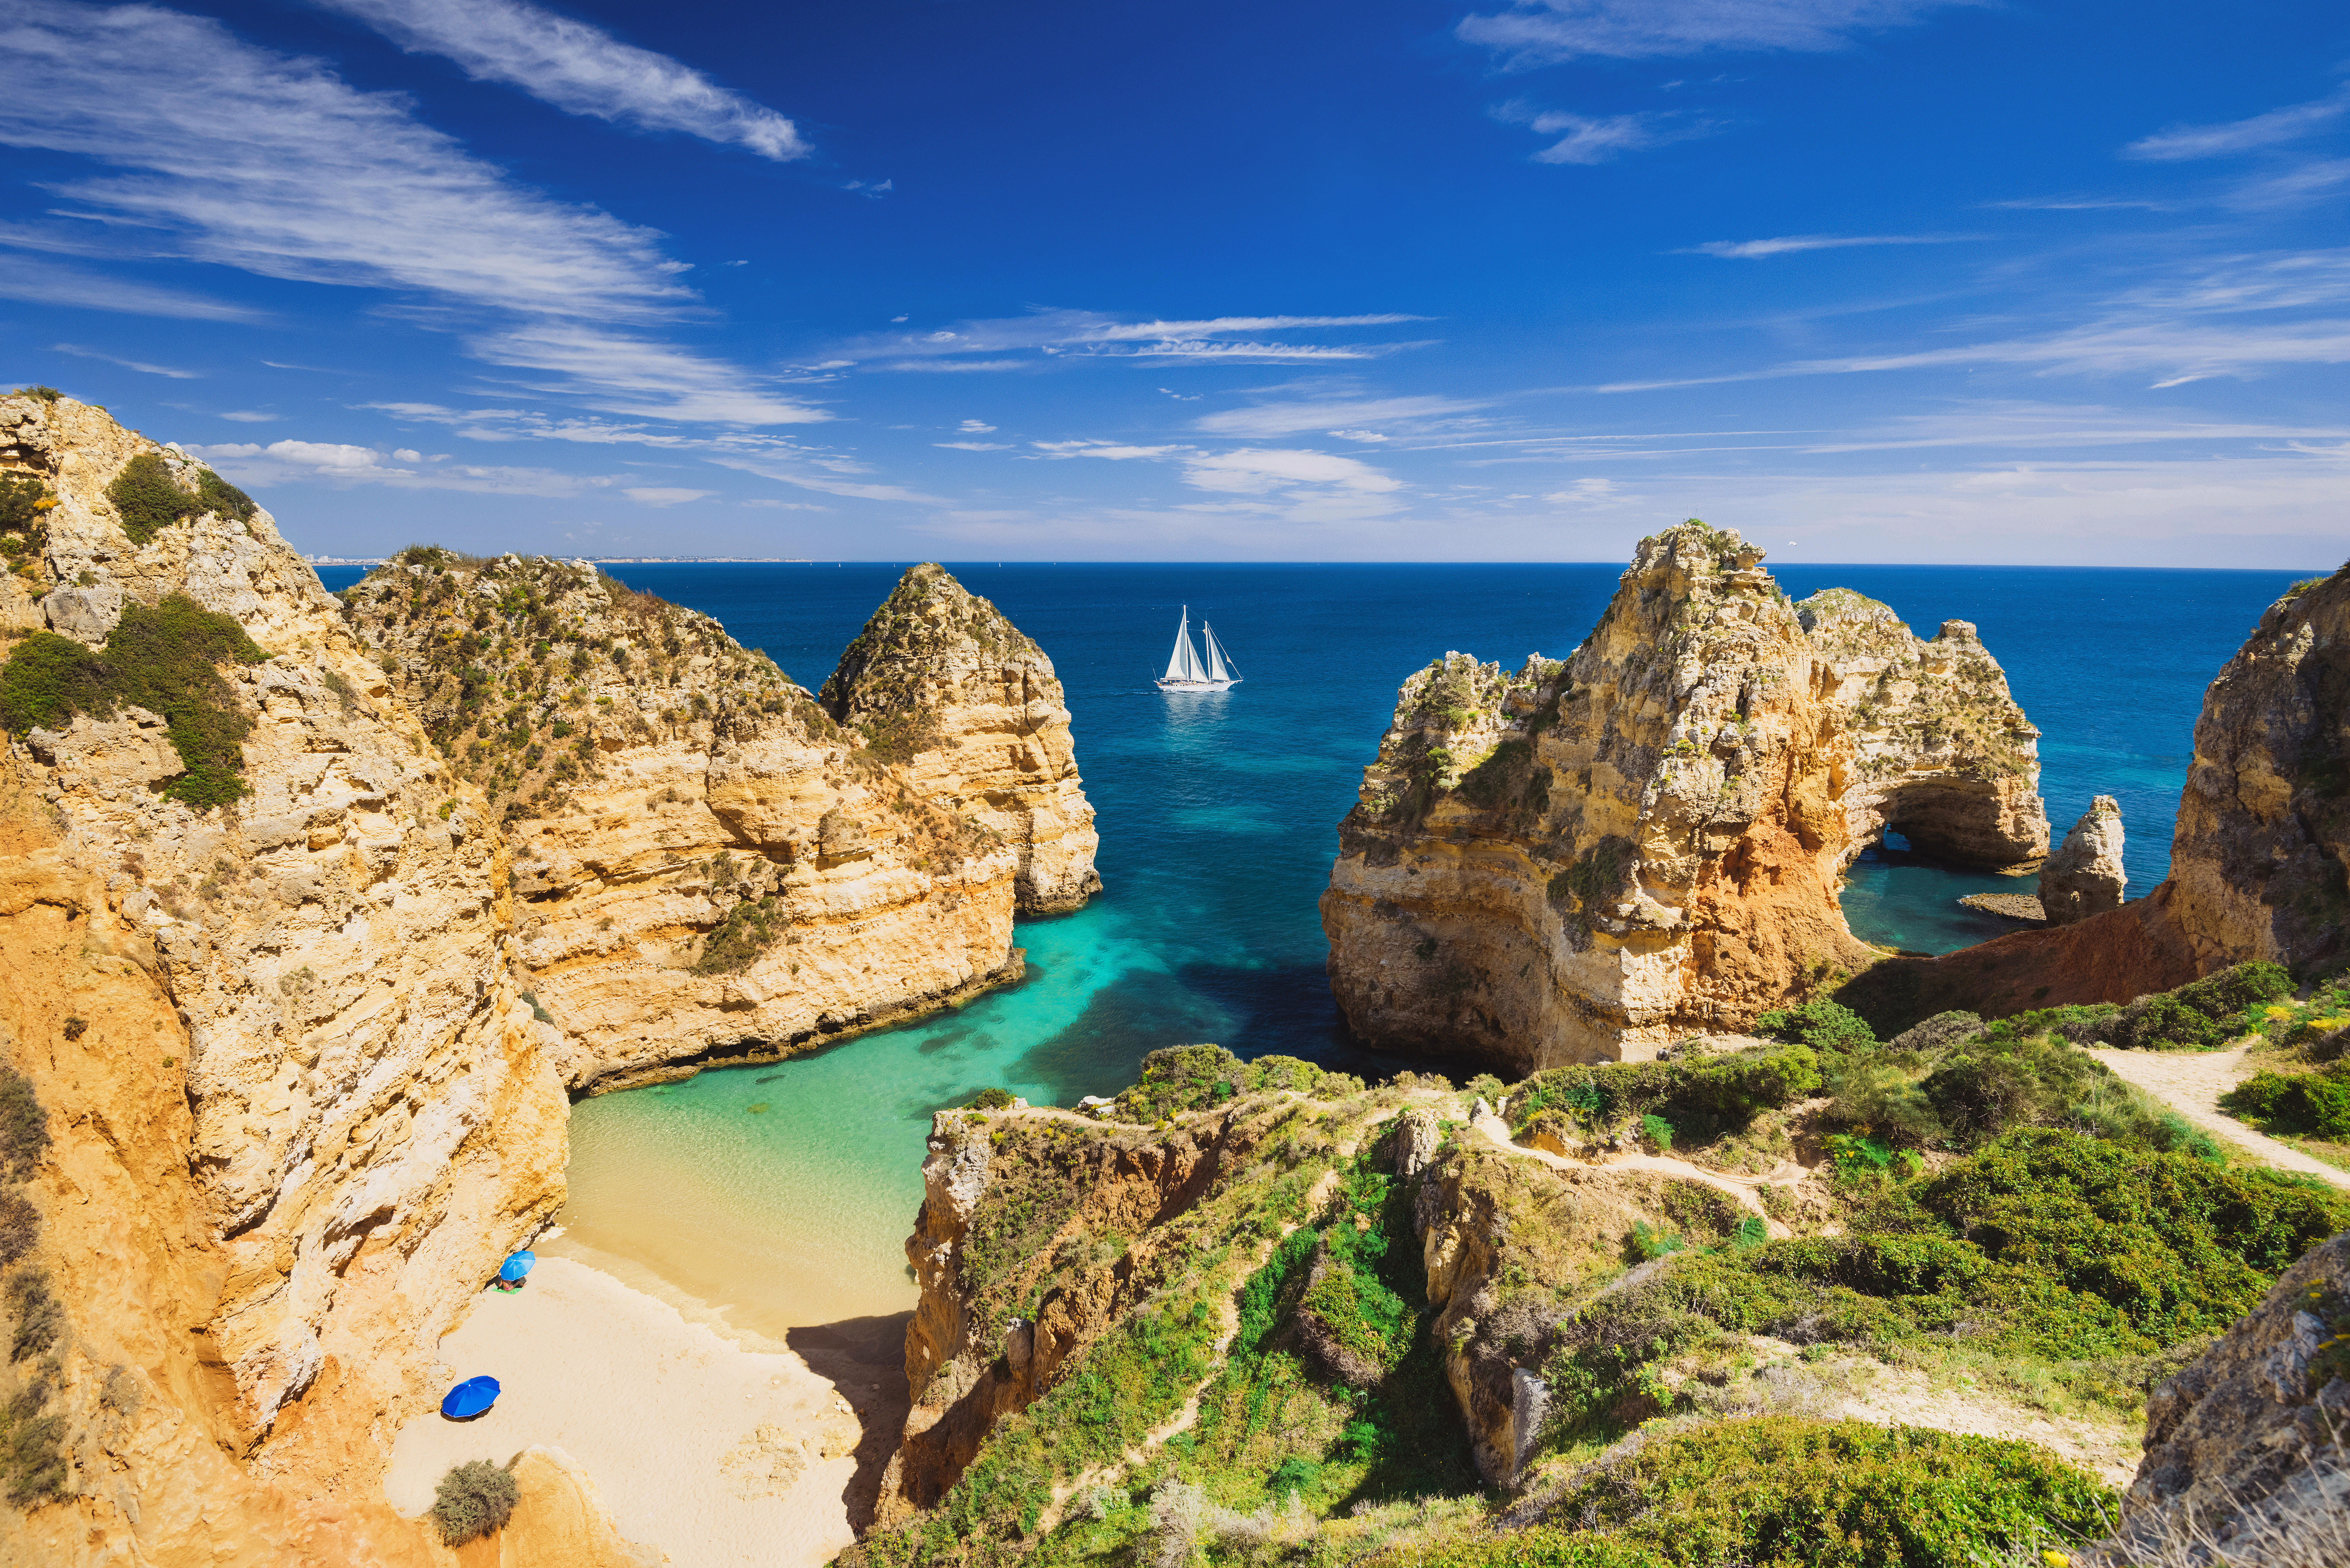 Spectacular coastline views of blue waters and rocky outcrops in Portugal